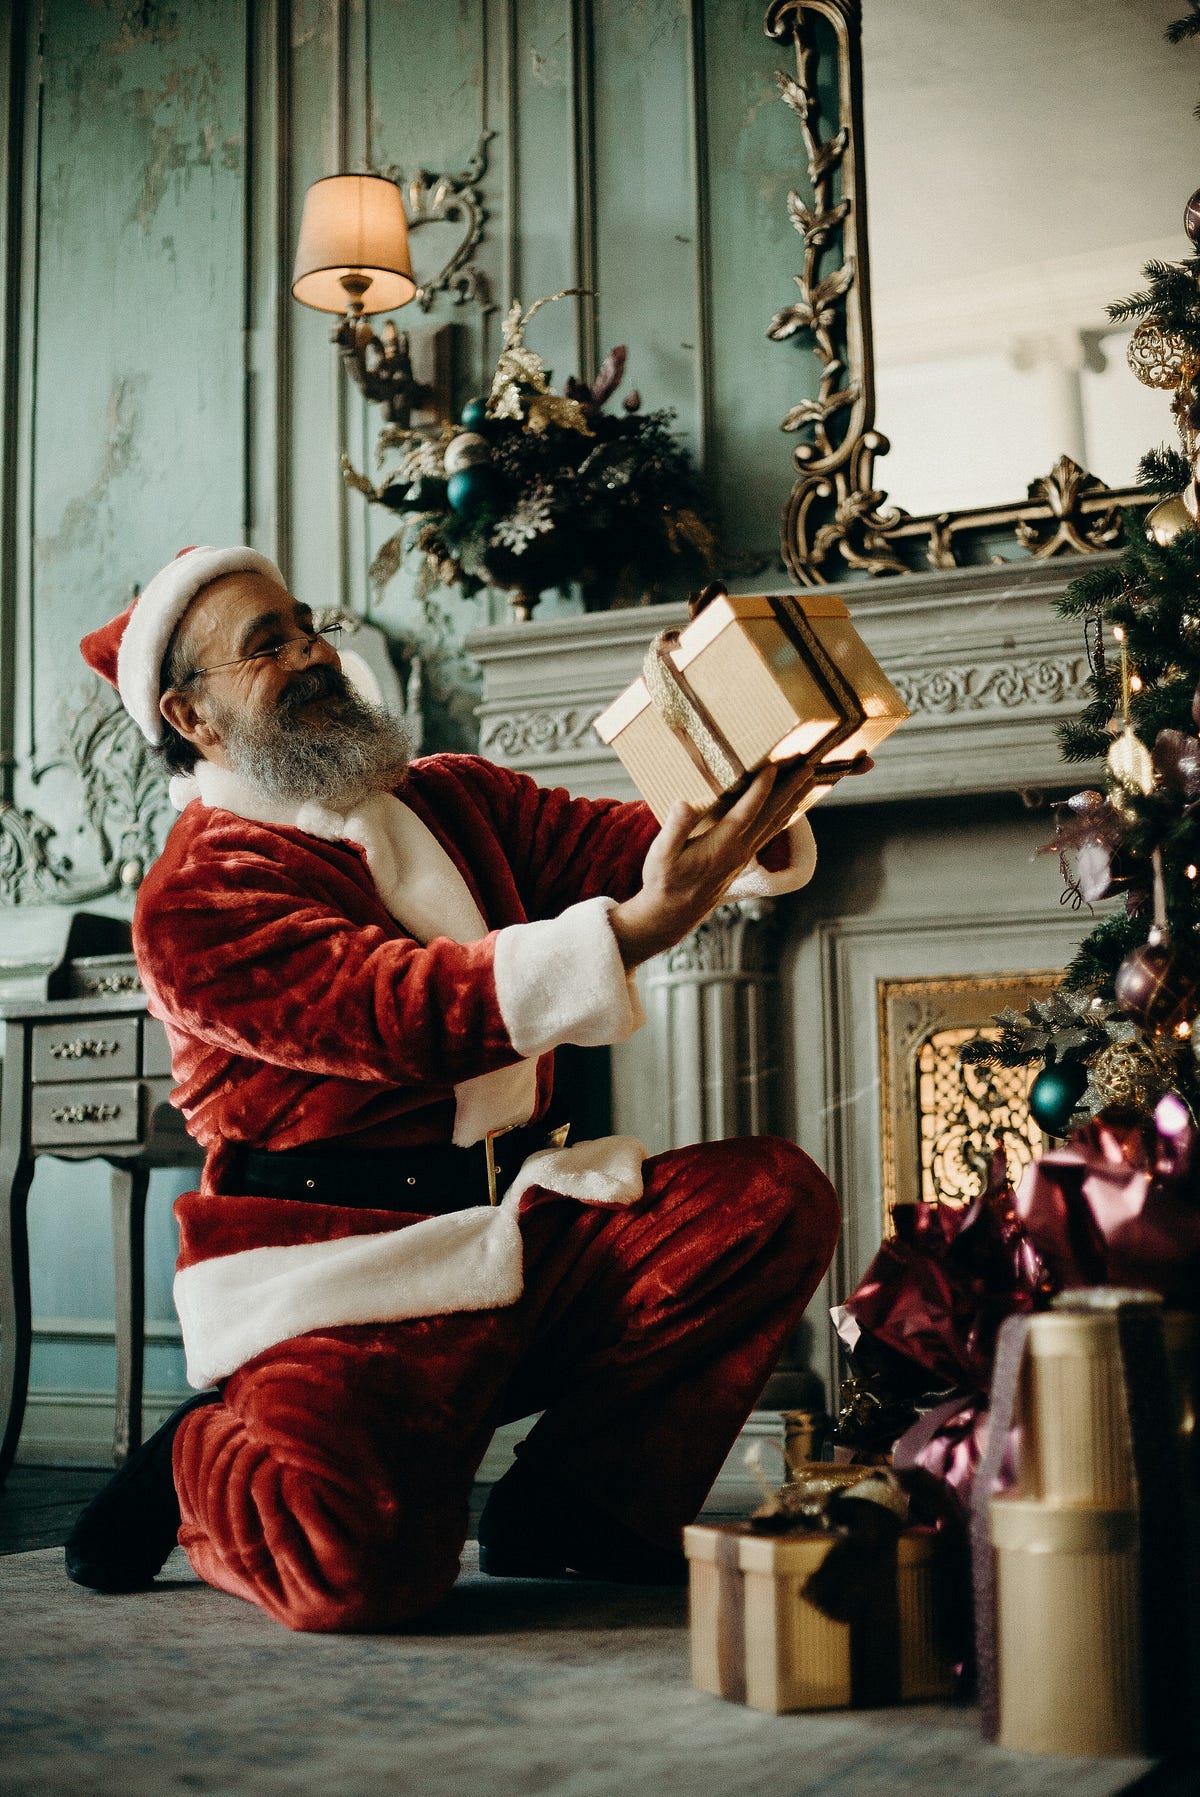 Santa Claus: The Iconic Figure Who Merges Pagan and Christian ...